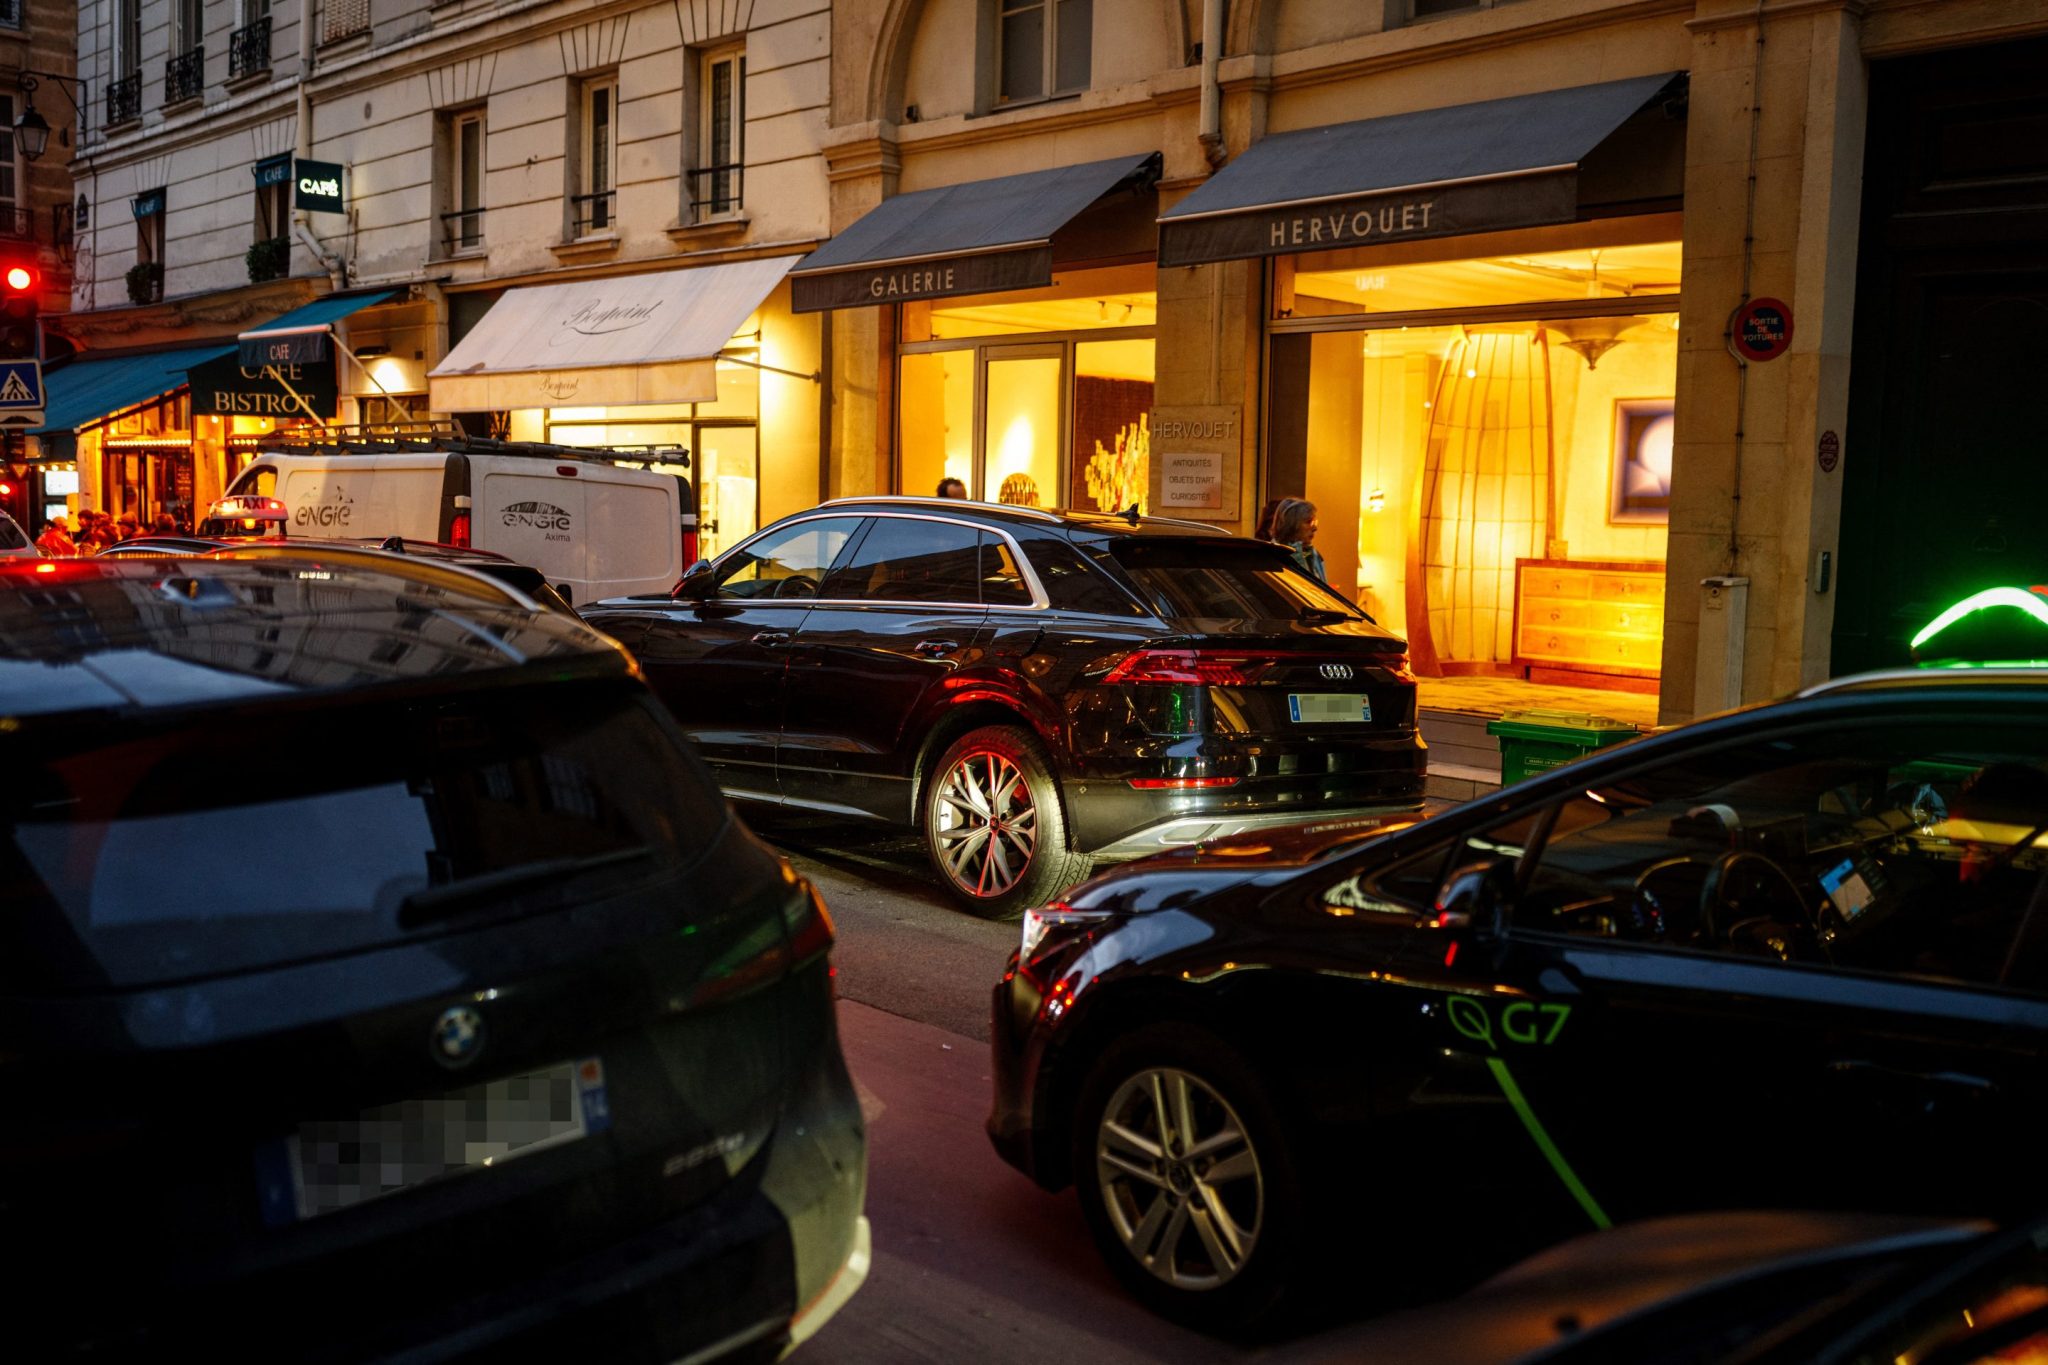 Paris targets SUVs with higher parking fees